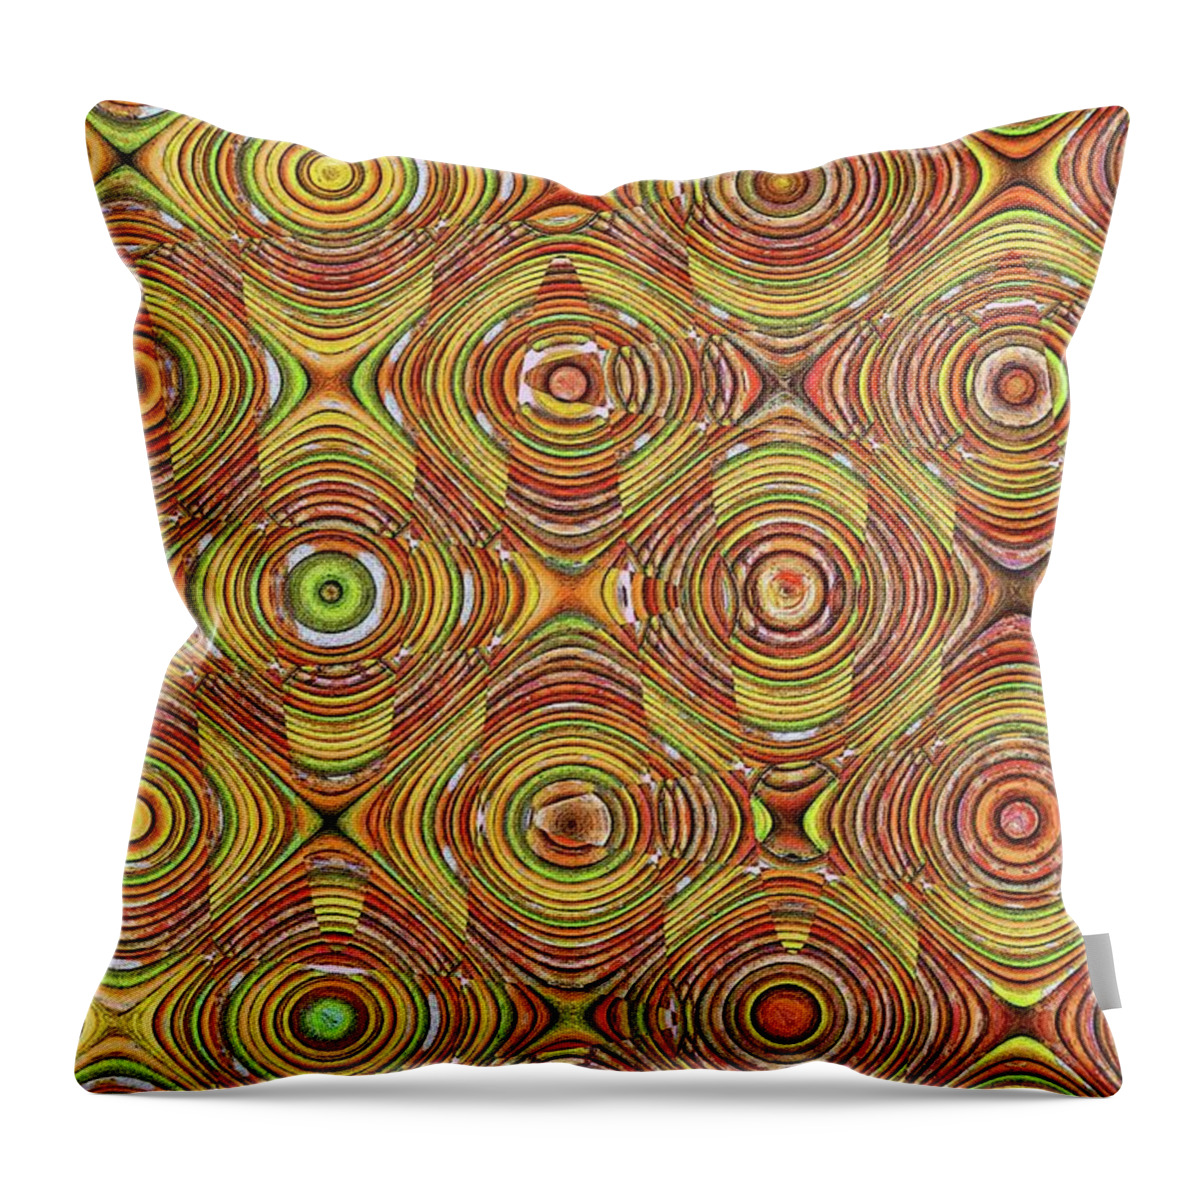 Dry Sticks Abstract 4557 Throw Pillow featuring the digital art Dry Sticks Abstract 4557 by Tom Janca